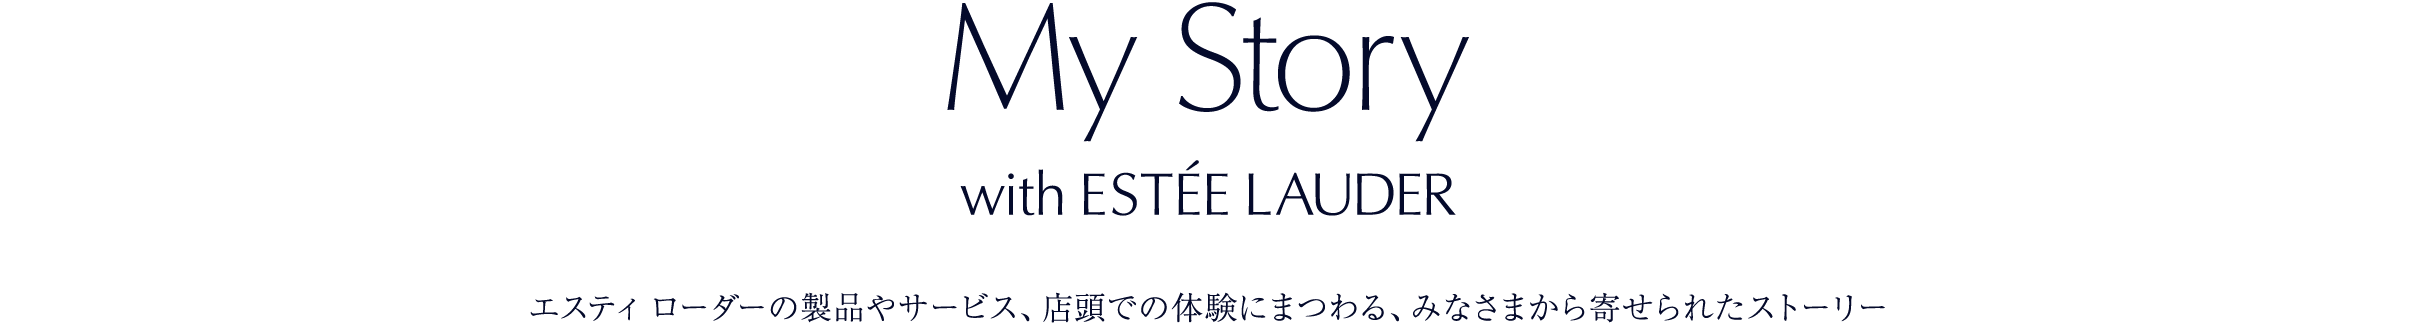 My Story with ESTEE LAUDER